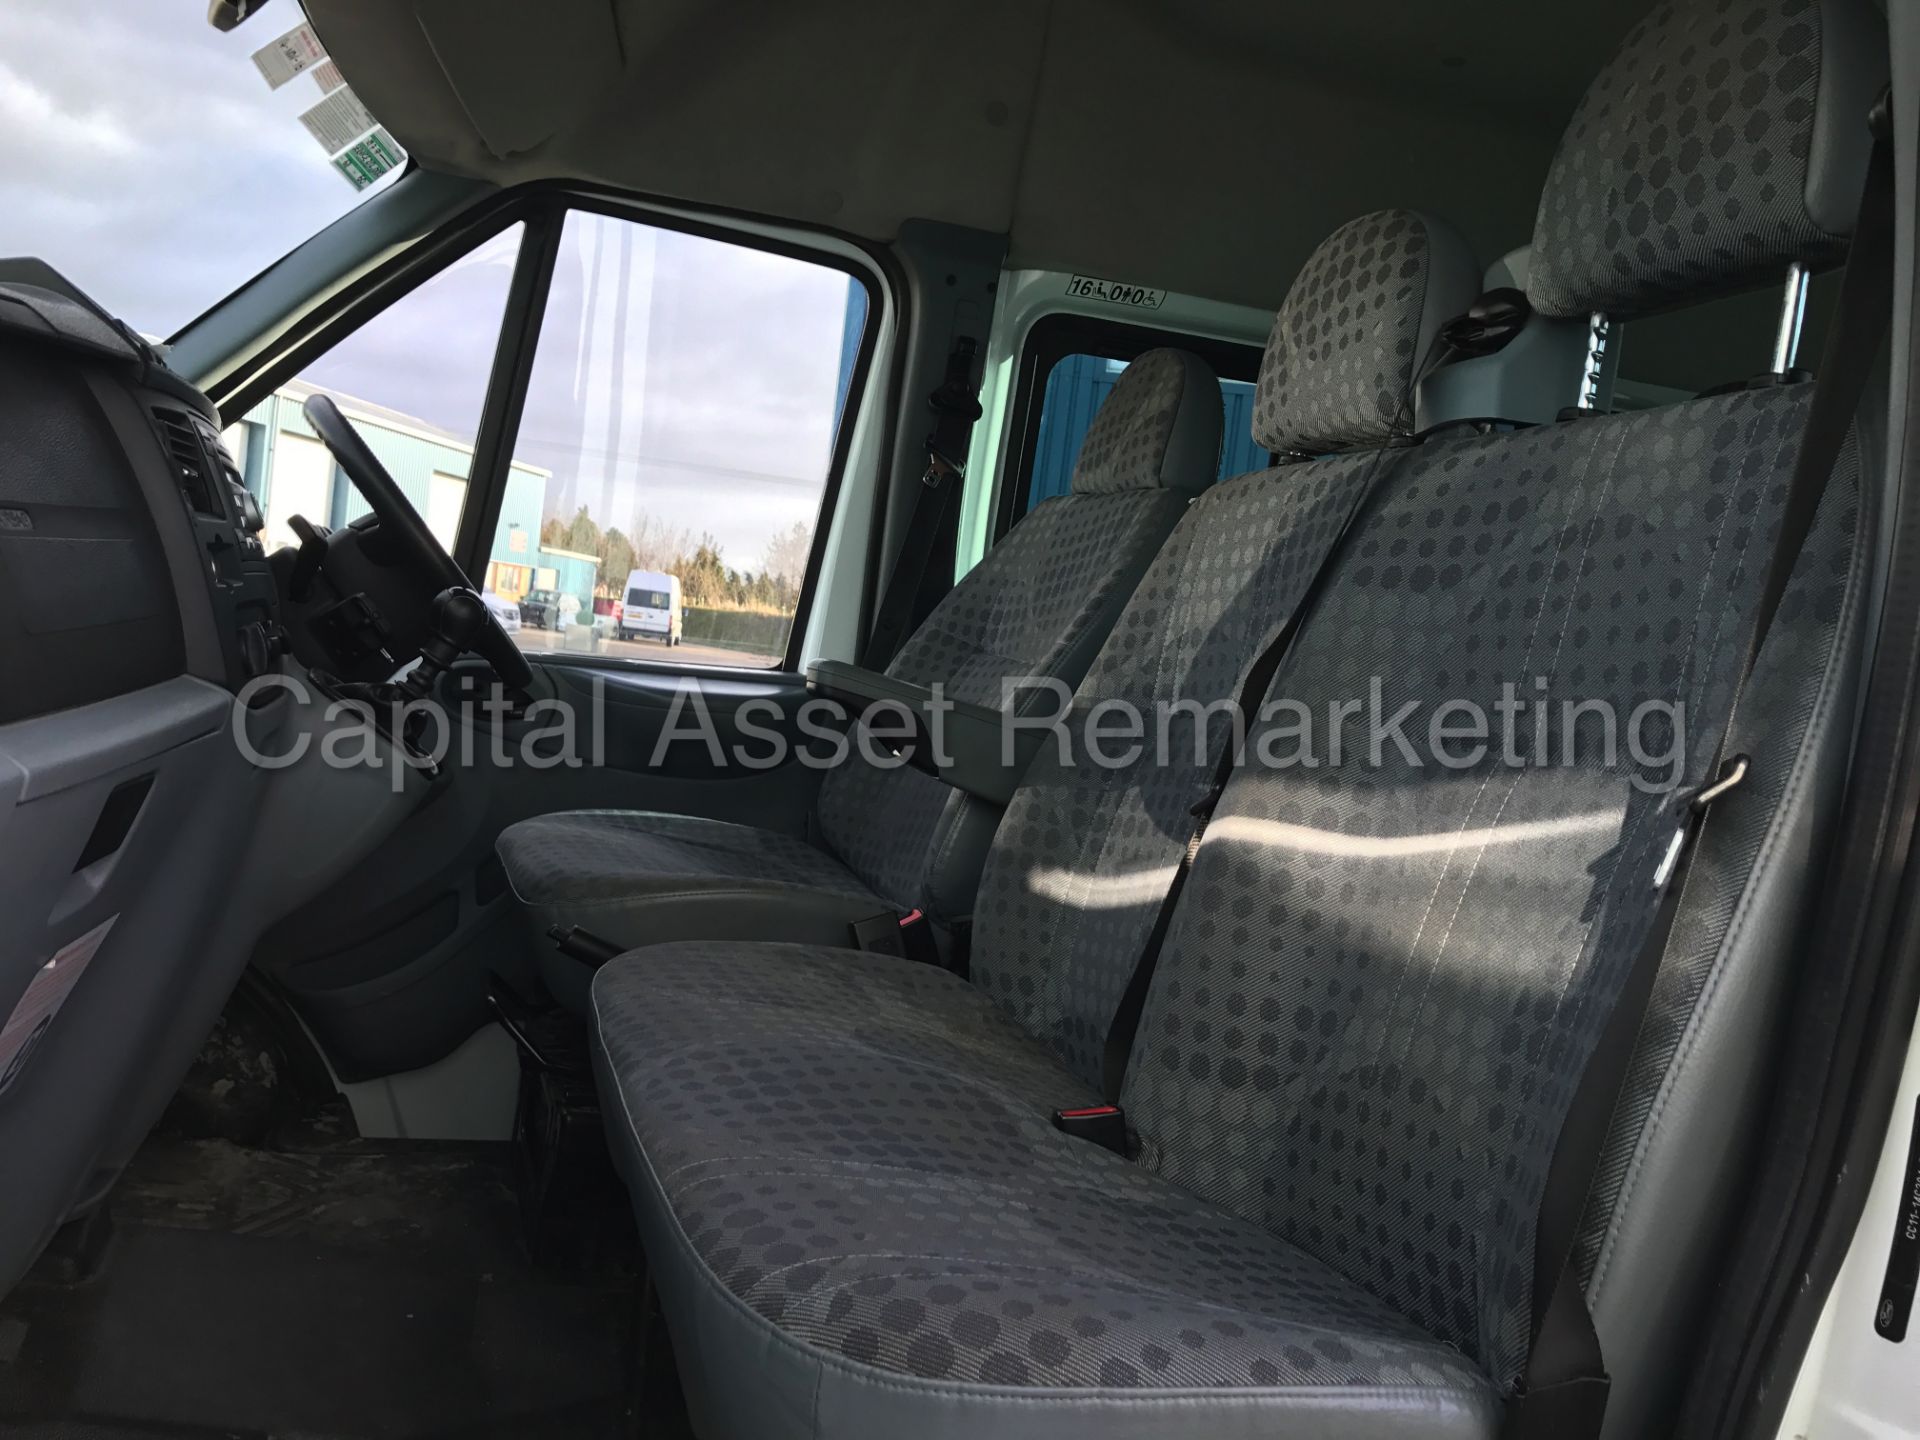 (On Sale) FORD TRANSIT 135 T430 '17 SEATER MINI-BUS' (2012) XLWB HI-ROOF (1 OWNER - FULL HISTORY) - Image 22 of 24